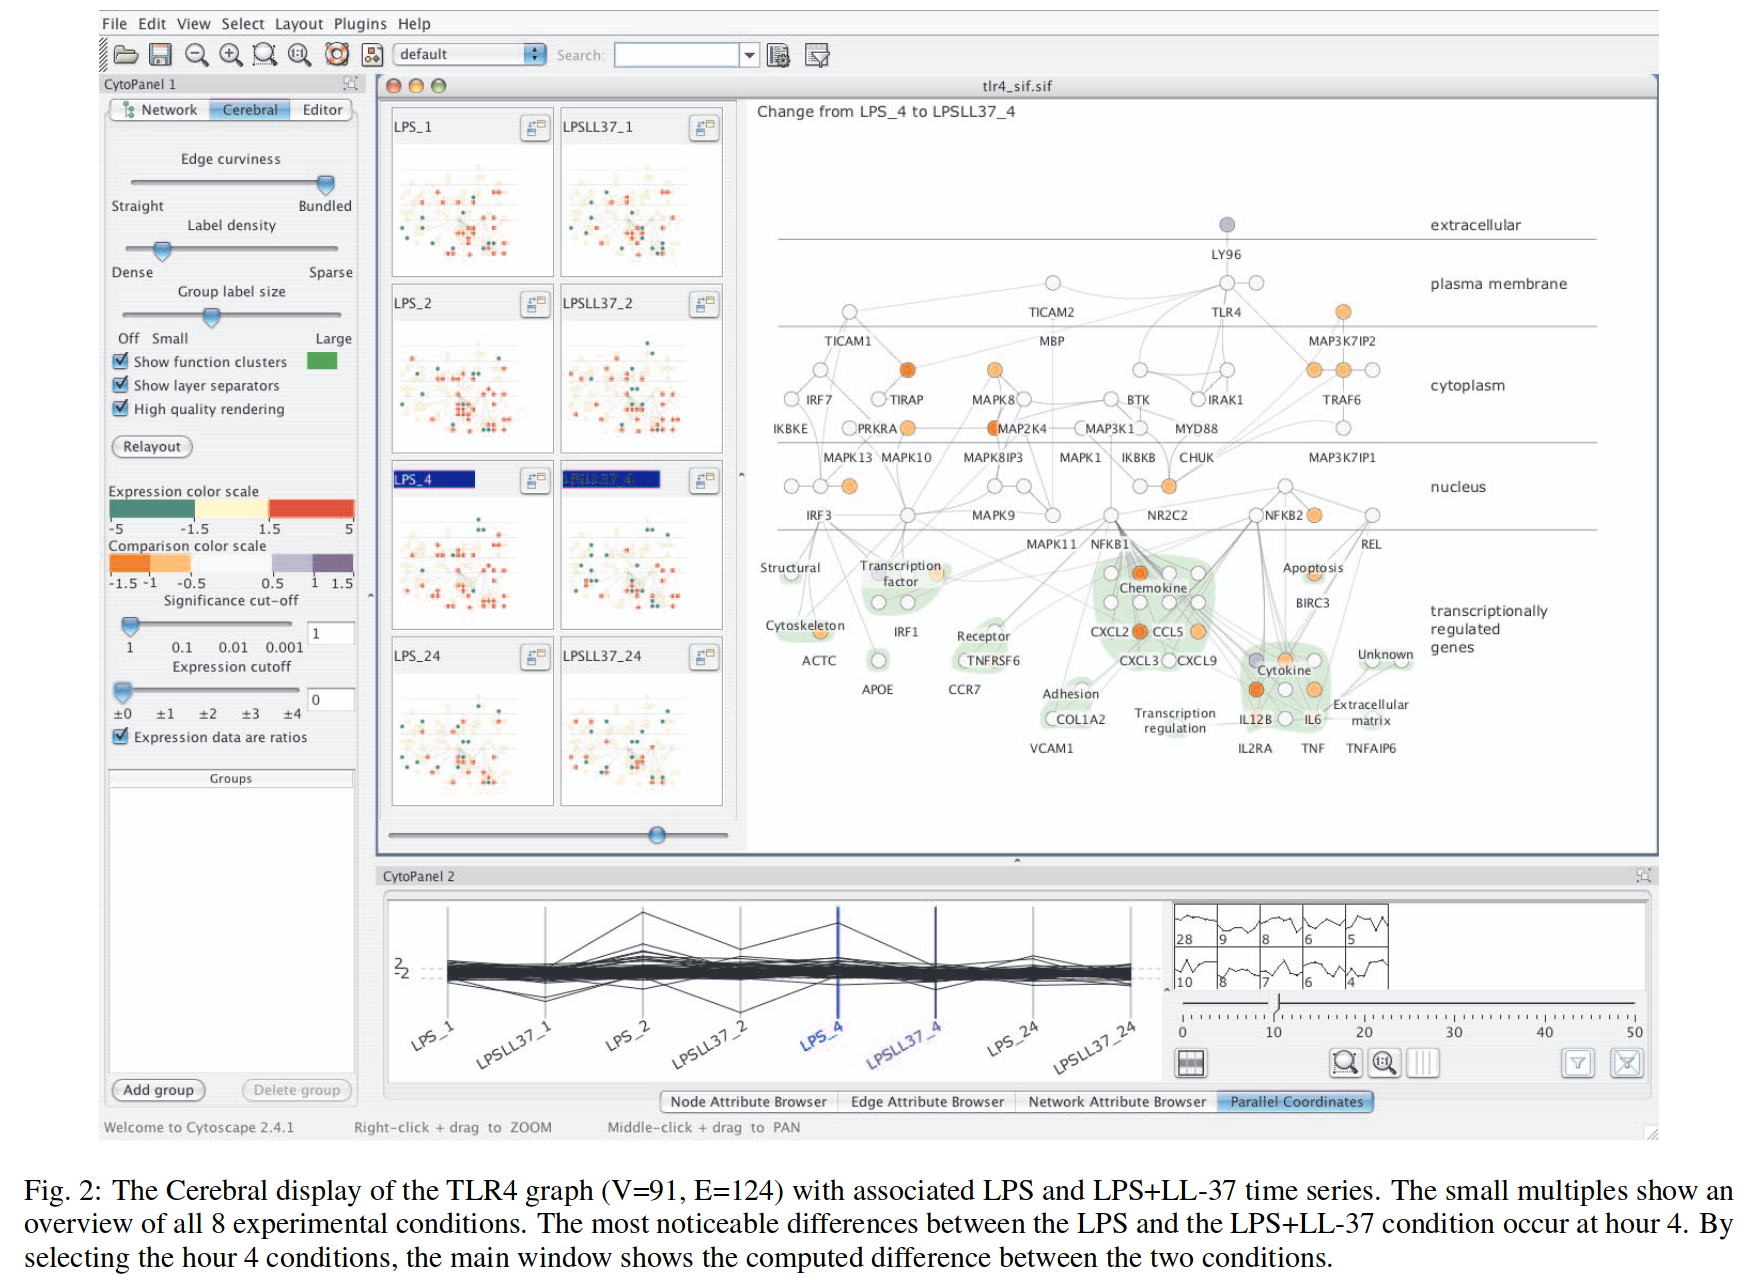 Fuente: Barsky et al, VCerebral: Visualizing multiple experimental conditions on a graph with biological context.